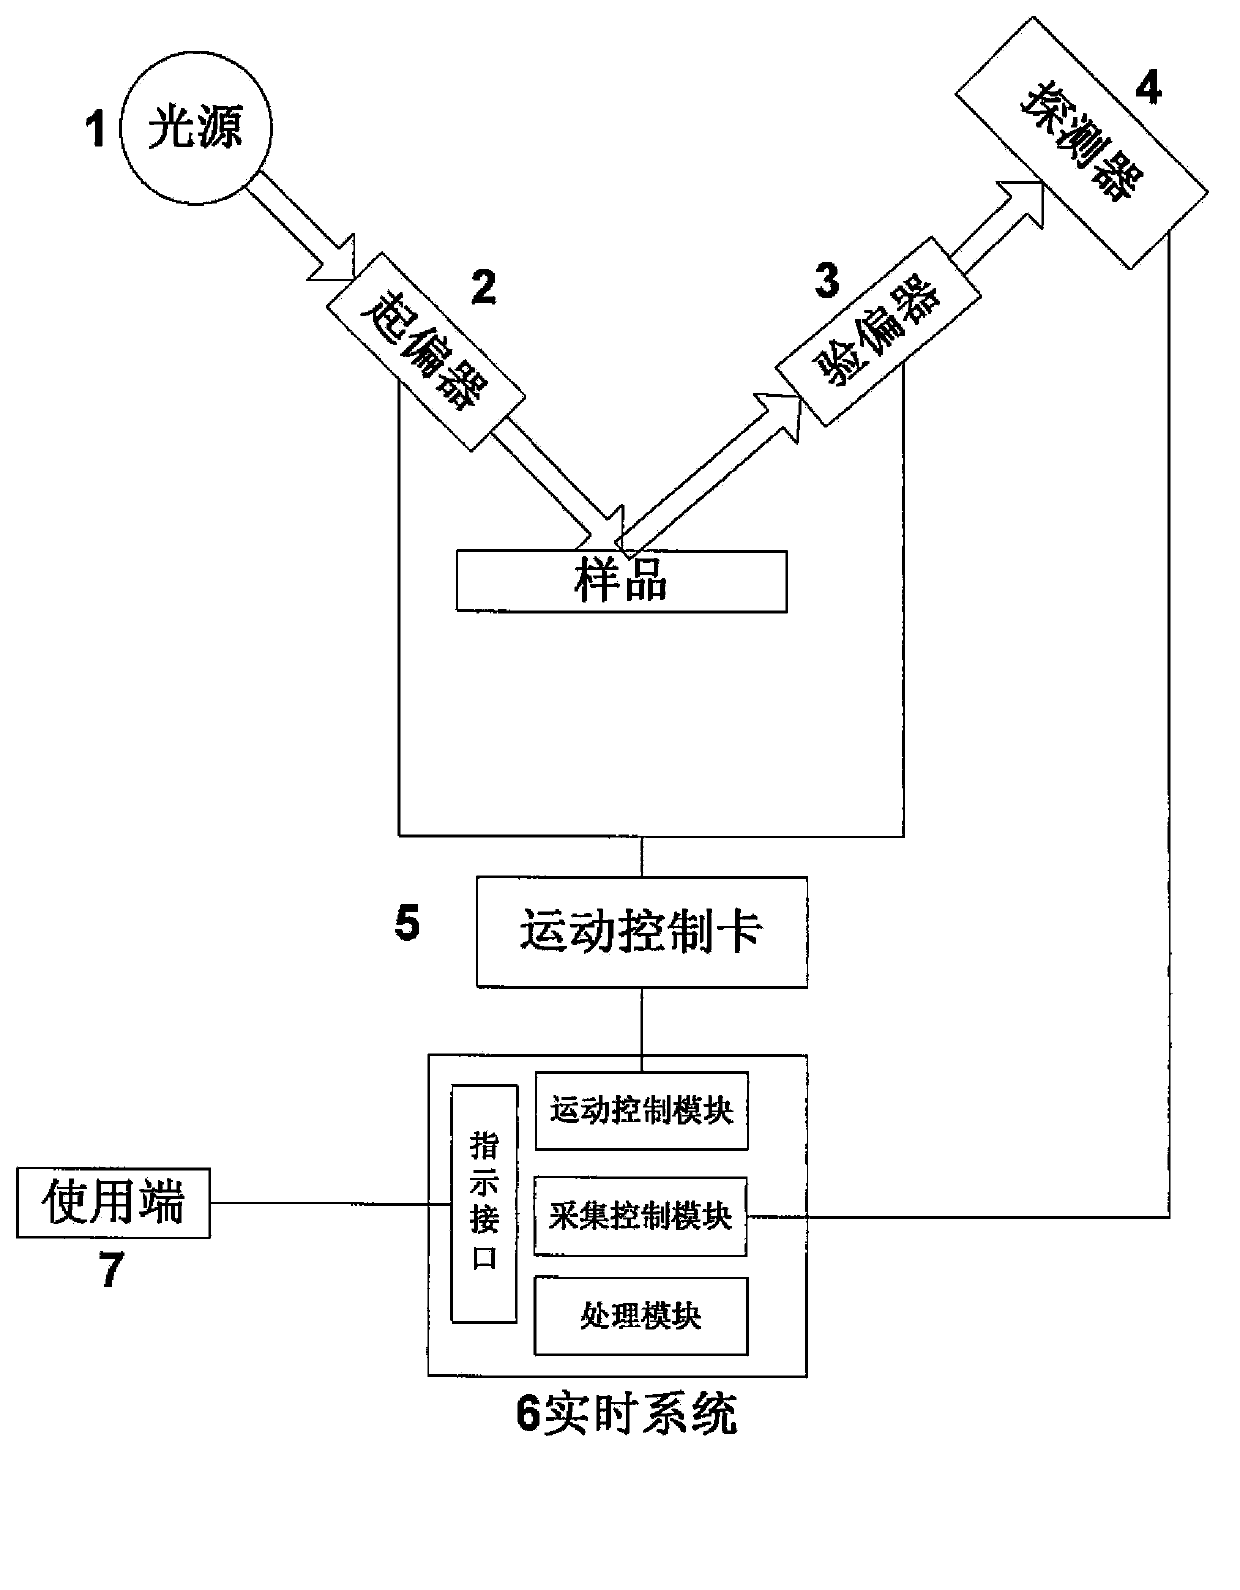 Control method for controlling ellipsometer by using real-time system and real-time system